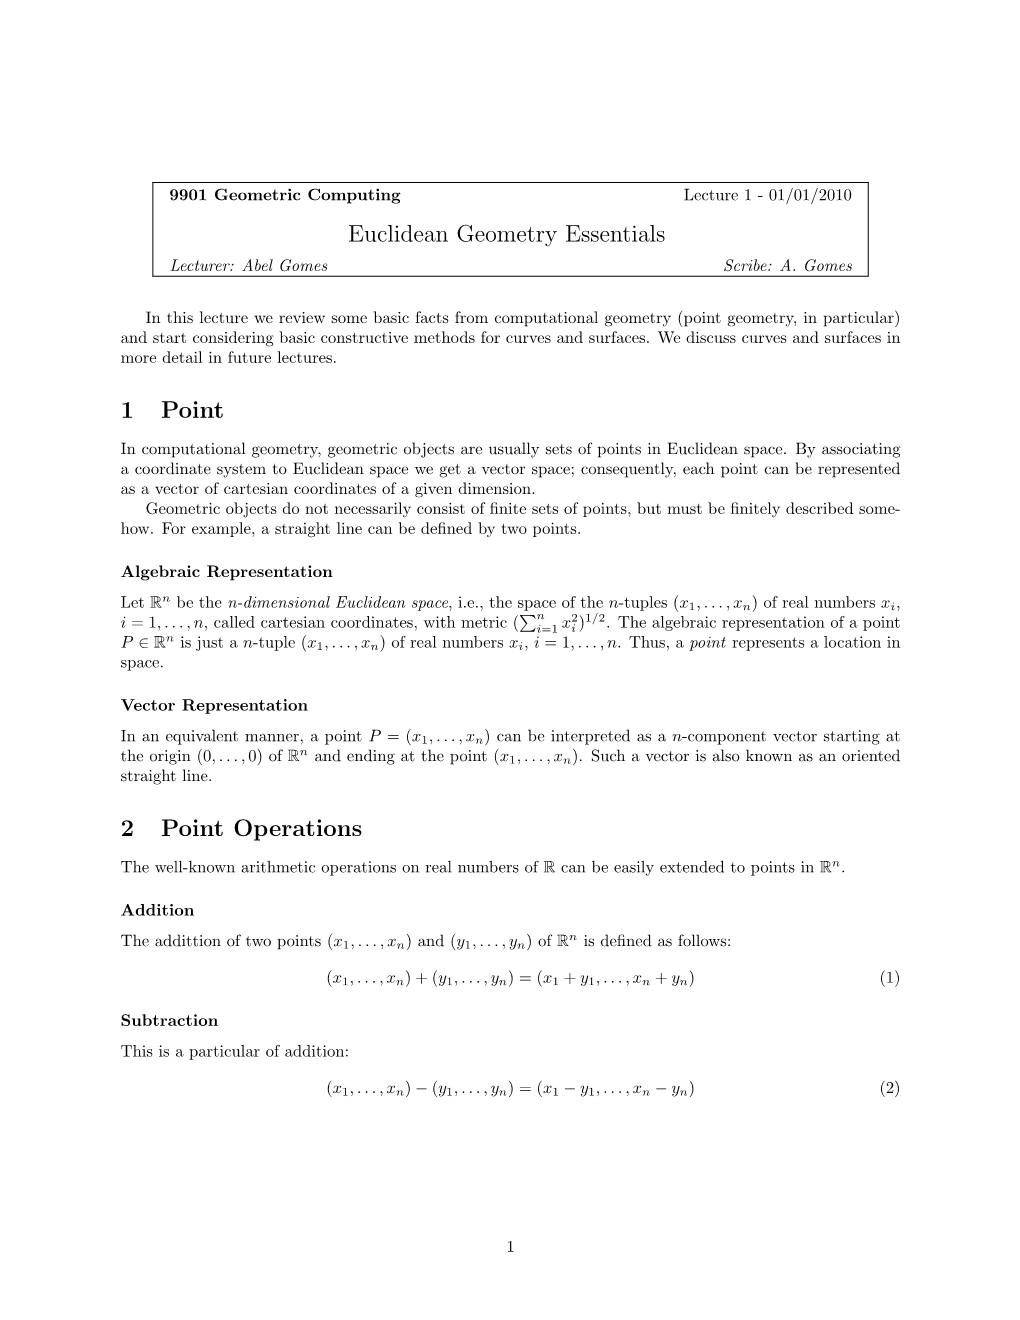 Euclidean Geometry Essentials 1 Point 2 Point Operations